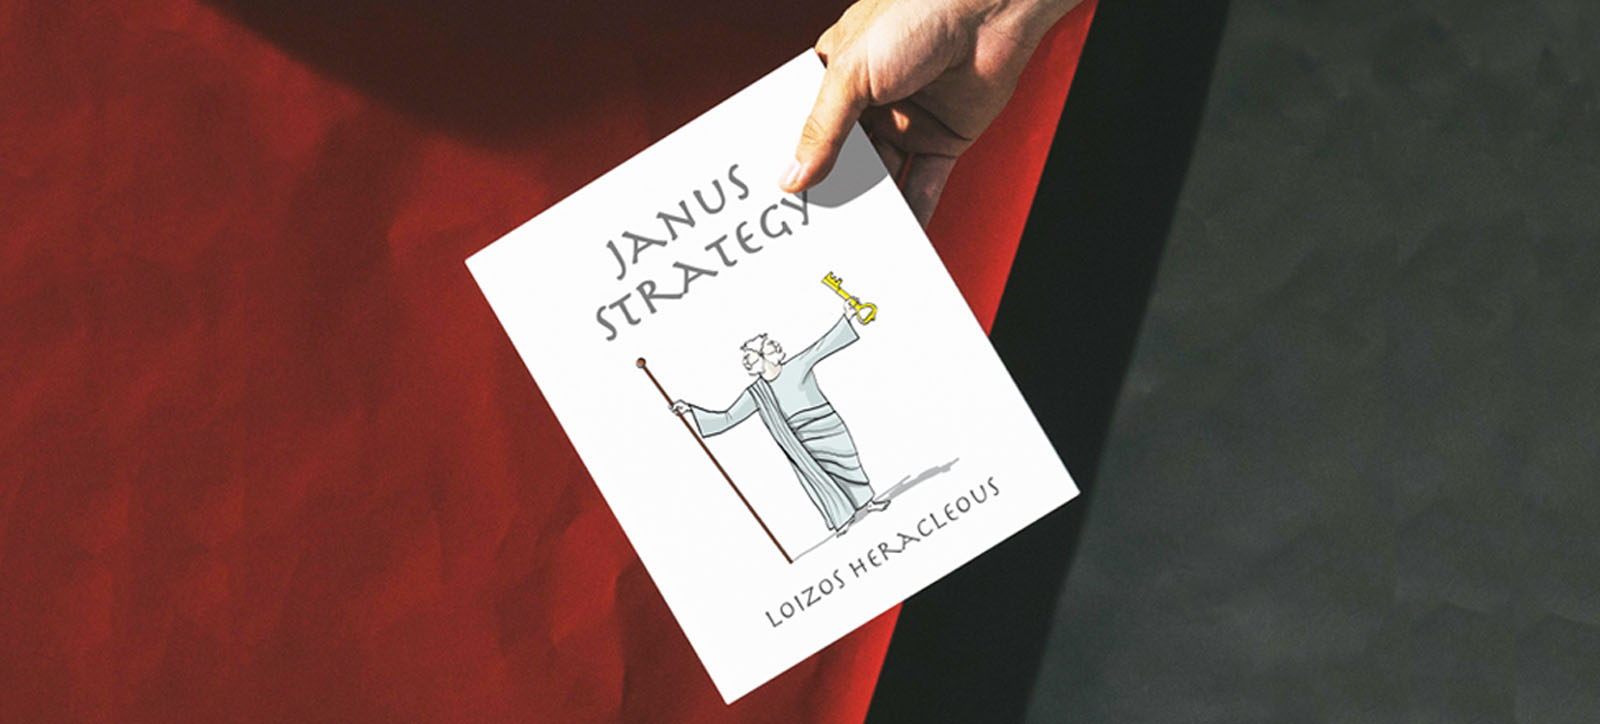 A picture of the book Janus Strategy